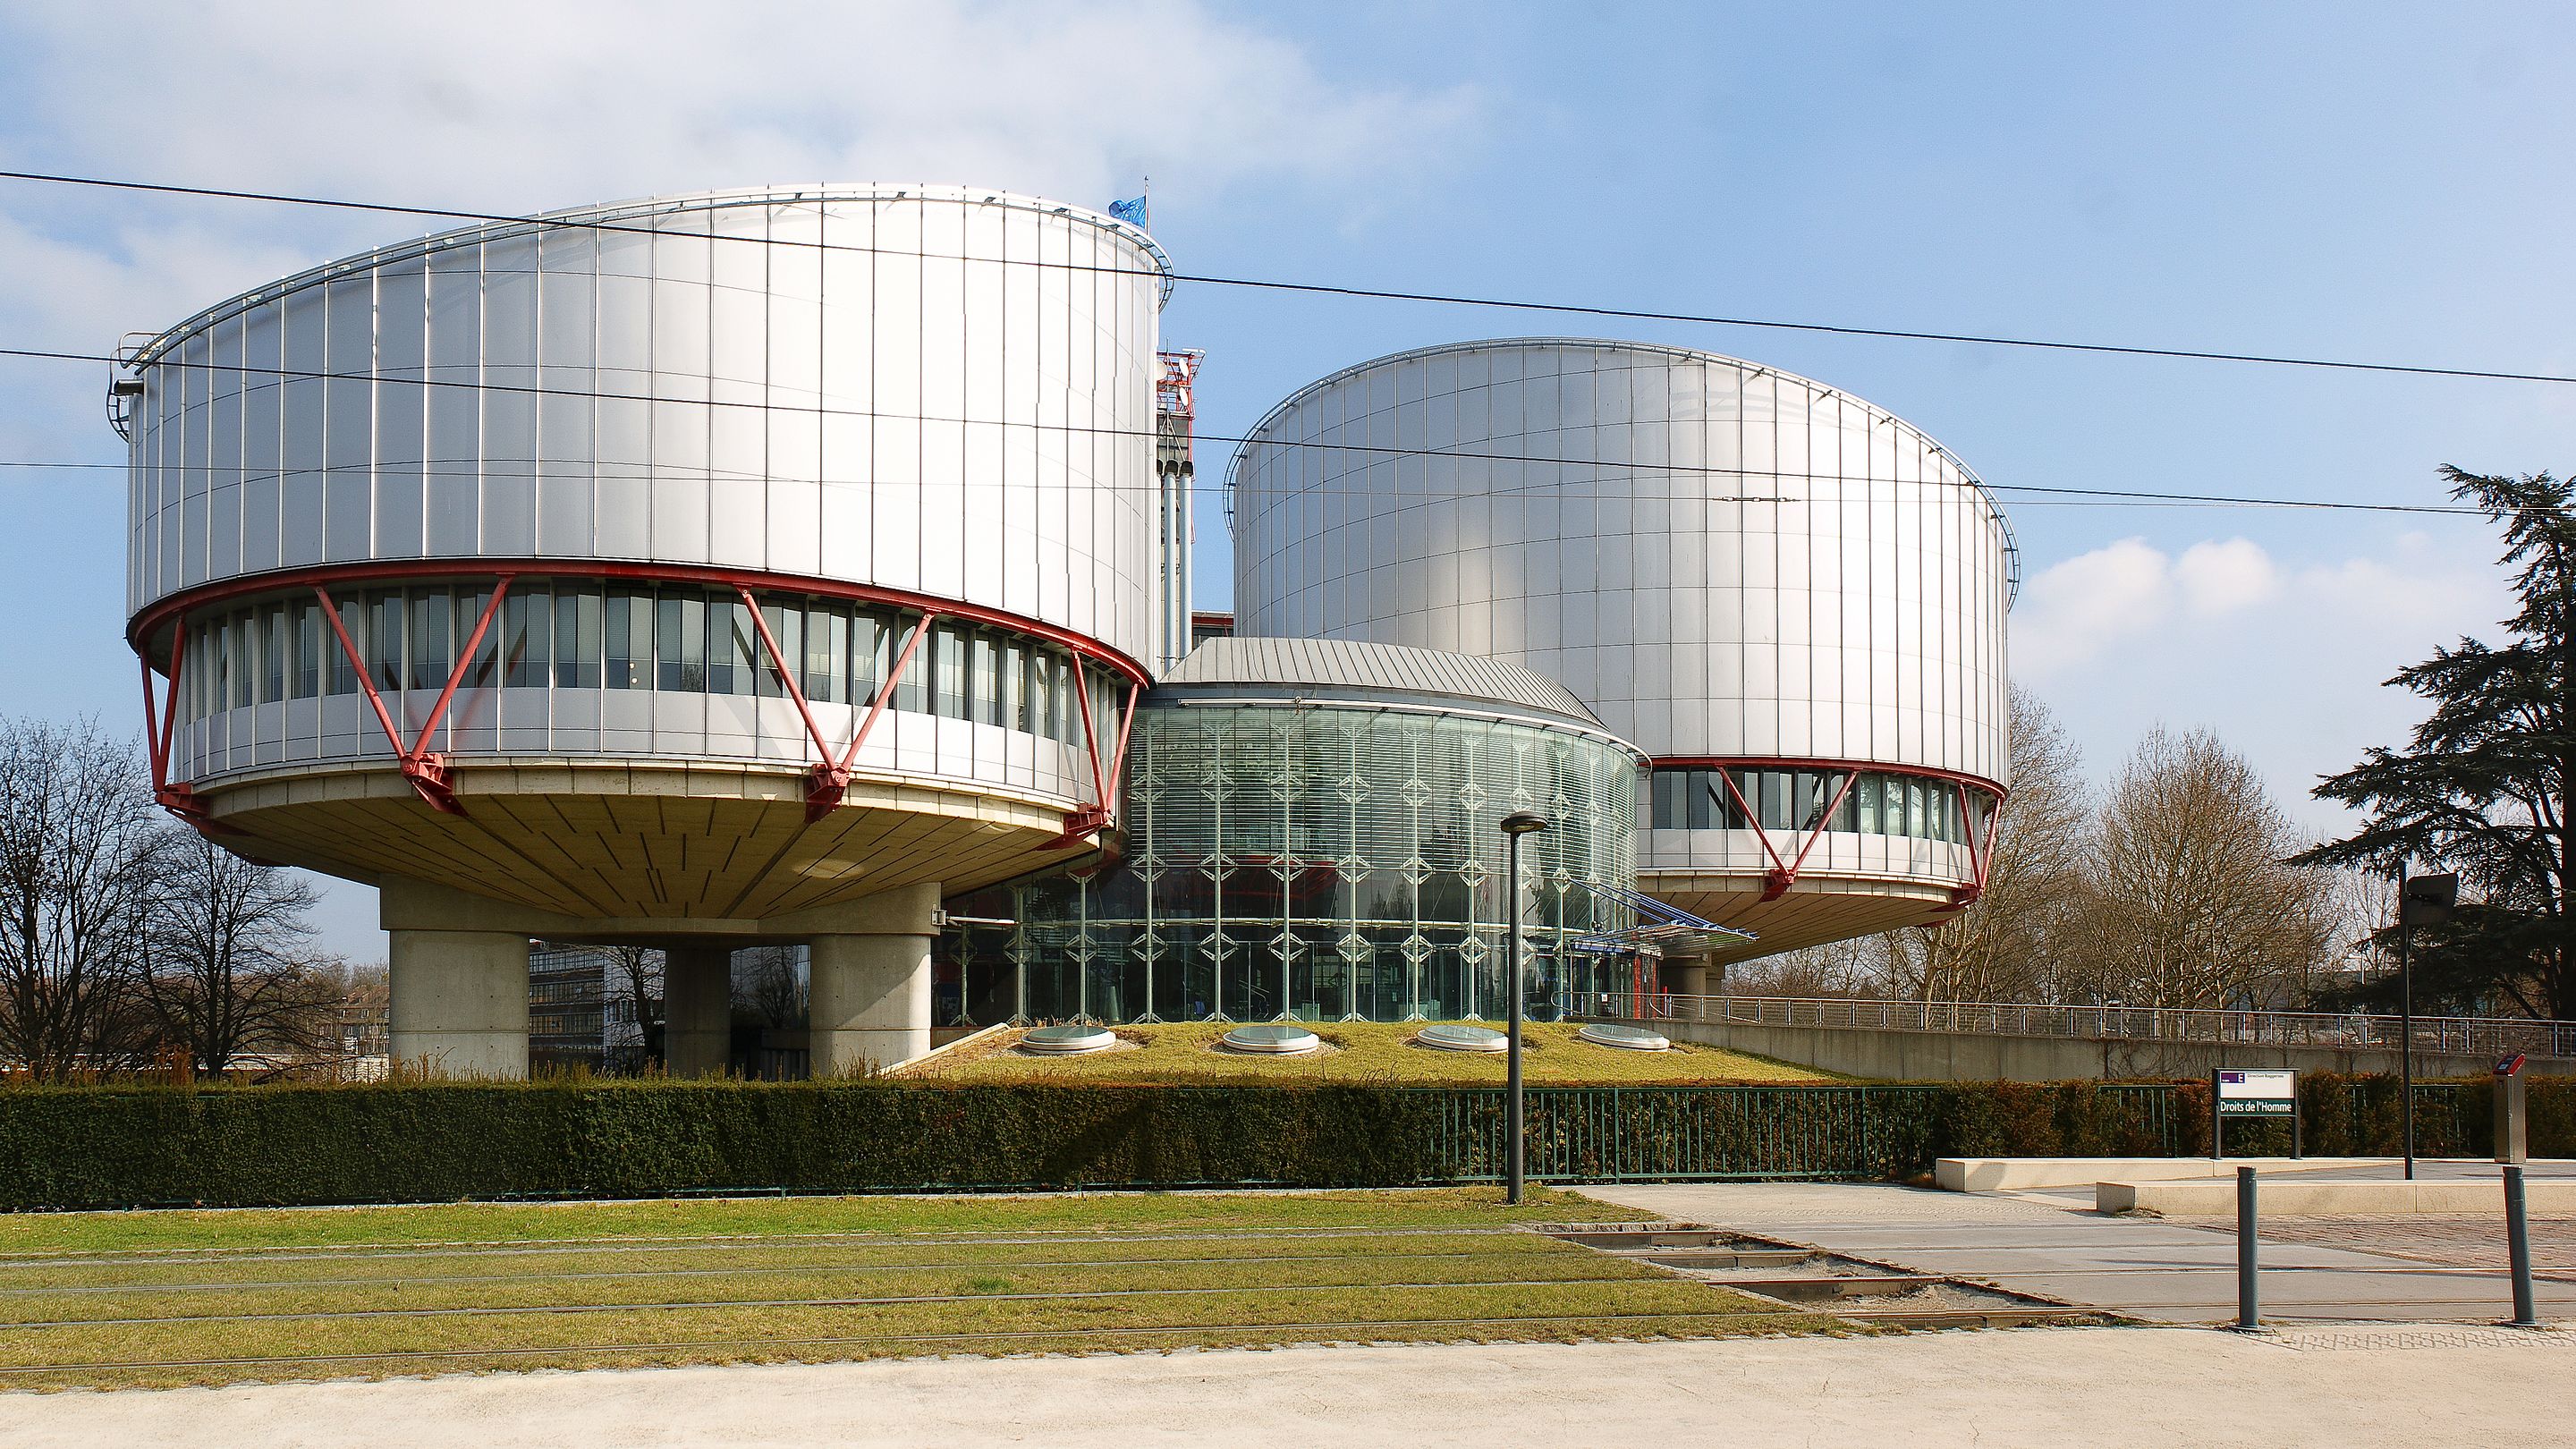 New ECHR protocol reduces time limit for filing rights cases from six to four months